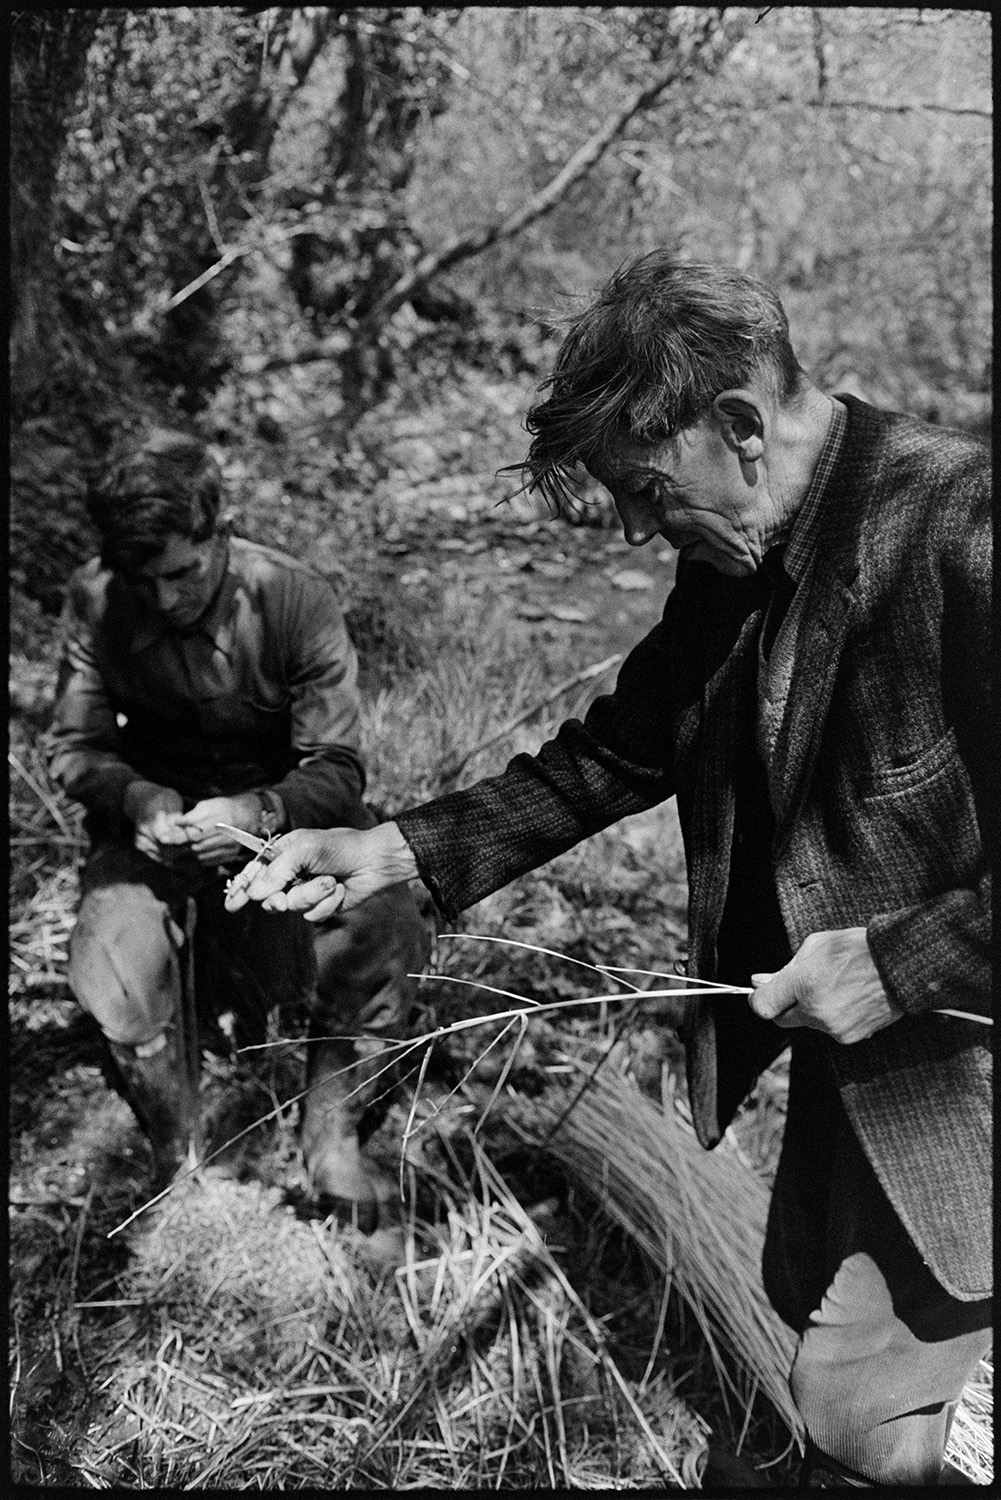 Two skinning (stripping) rods (willows) for basketwork. 
[Bill Folland and Bill Cooke stripping or skinning rods of willow to be used in basket making, near a stream at Colehouse, Riddlecombe.]